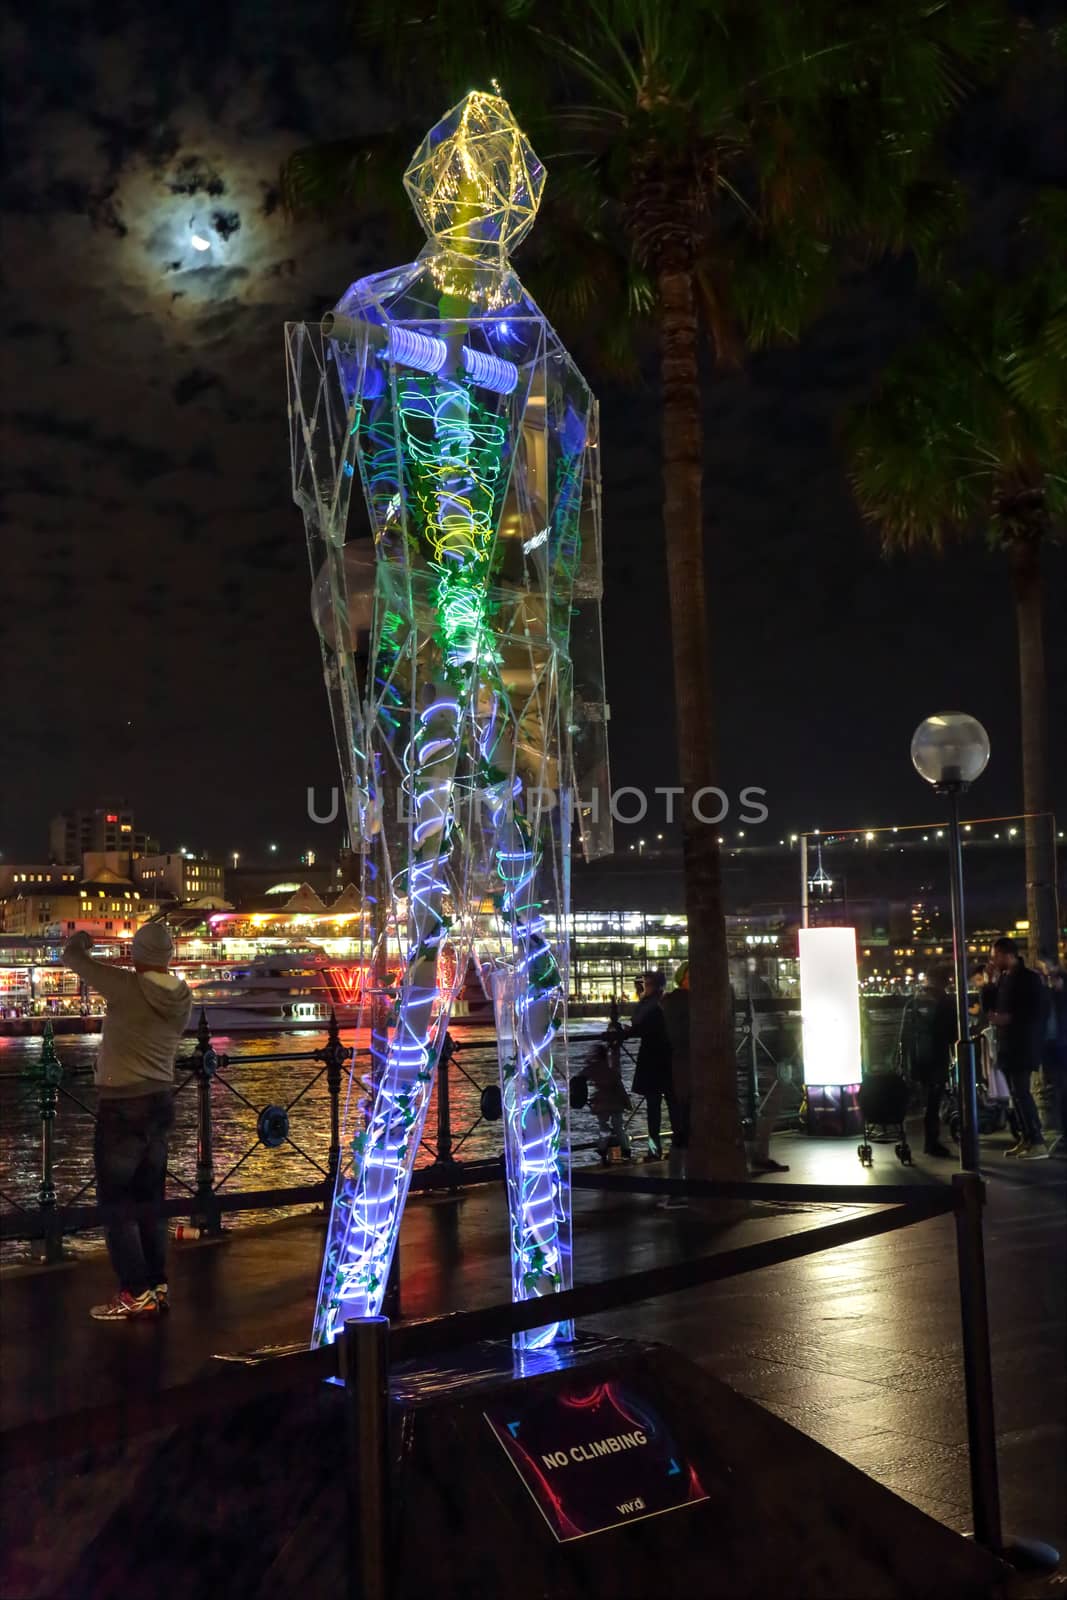 SYDNEY, AUSTRALIA - MAY 25, 2015; Sydney Vivid exhibit, Exposed reveals the interior worlds of three giant humanoid figures, each of which is transparent. Artists: Mark Gregan / Leo Trimboli / Catalina Chica / Patrick O’Dowd